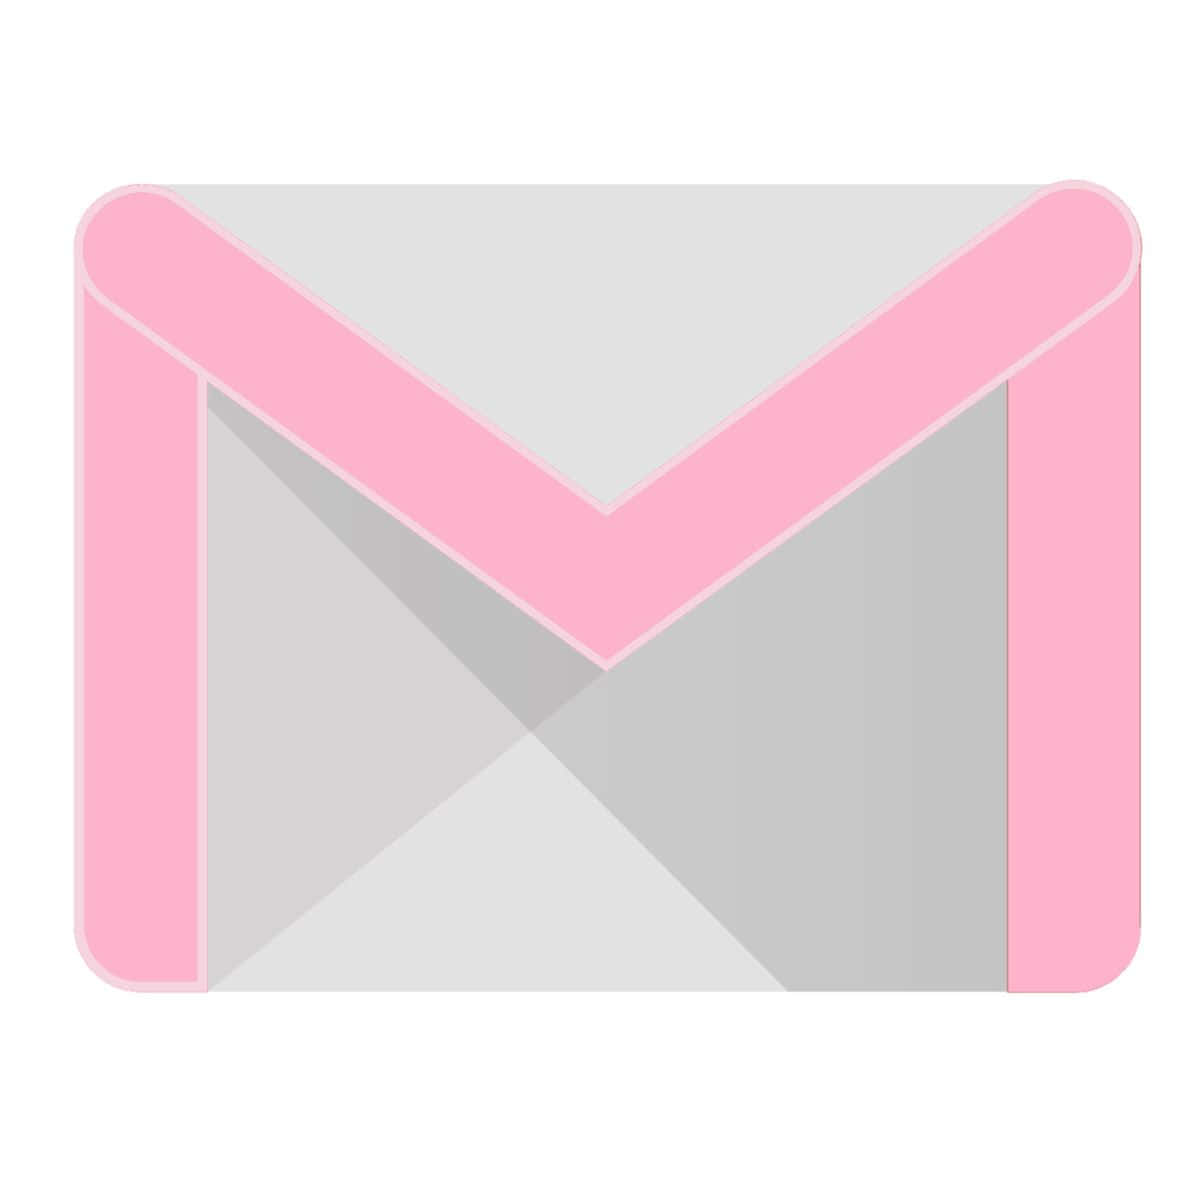 Gmail - The Most Popular Email Platform